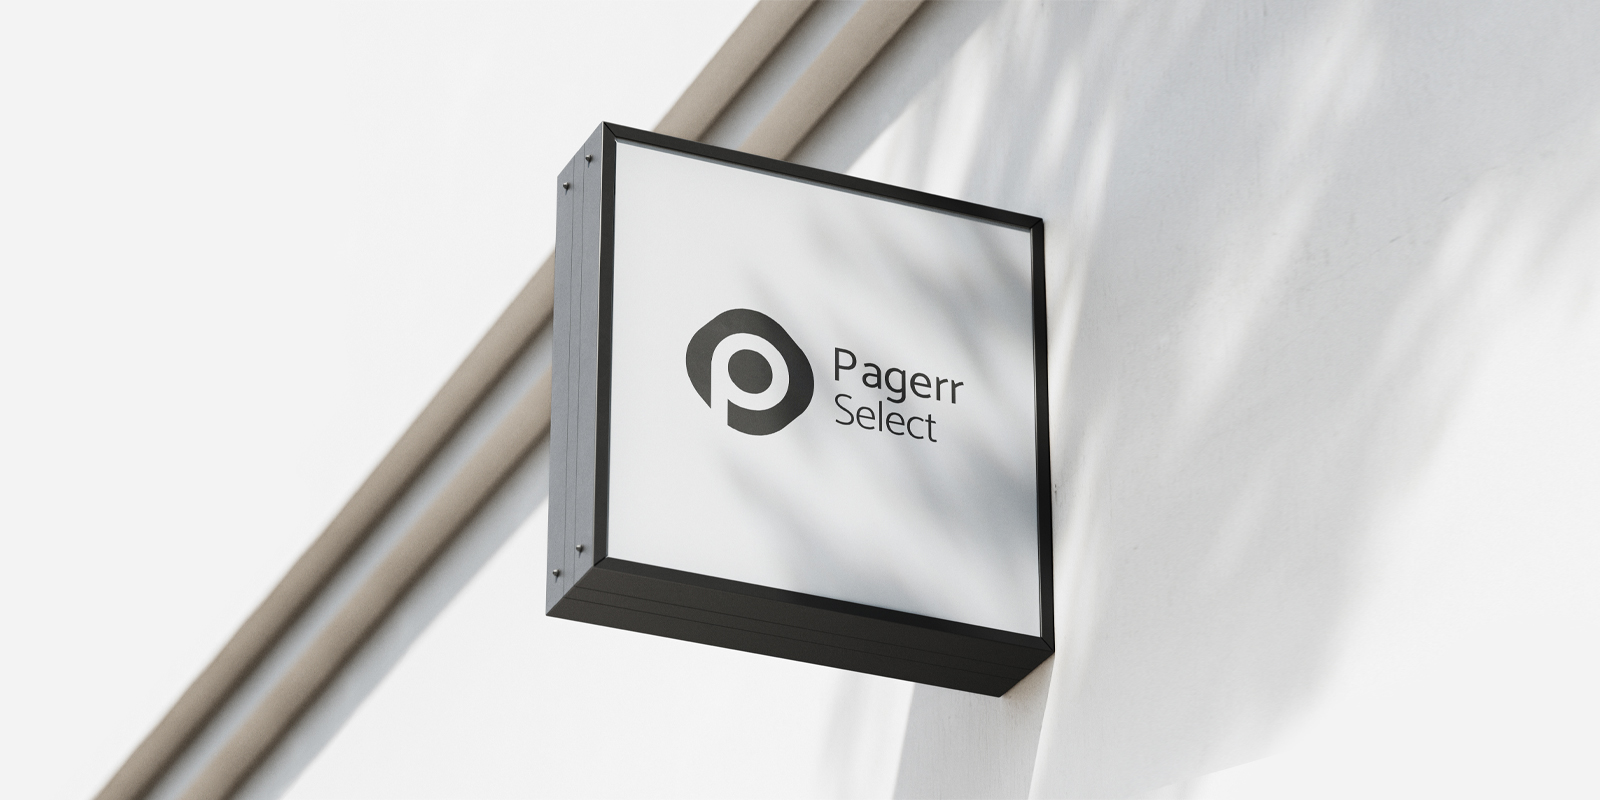 Essential signs in Bucharest - Print with Pagerr